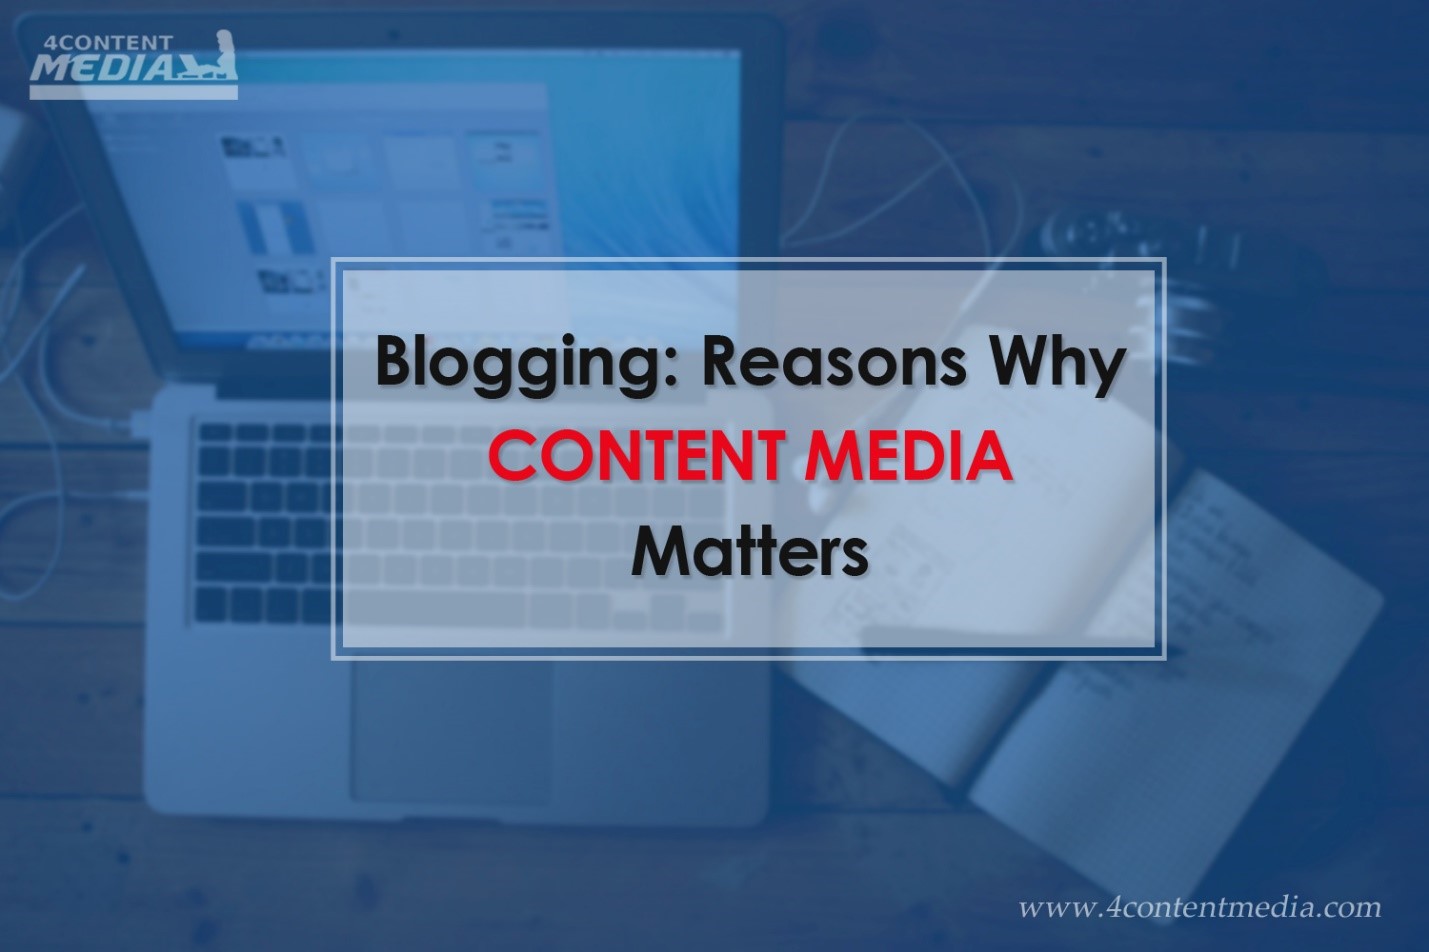 Blogging - Reasons why content media matters